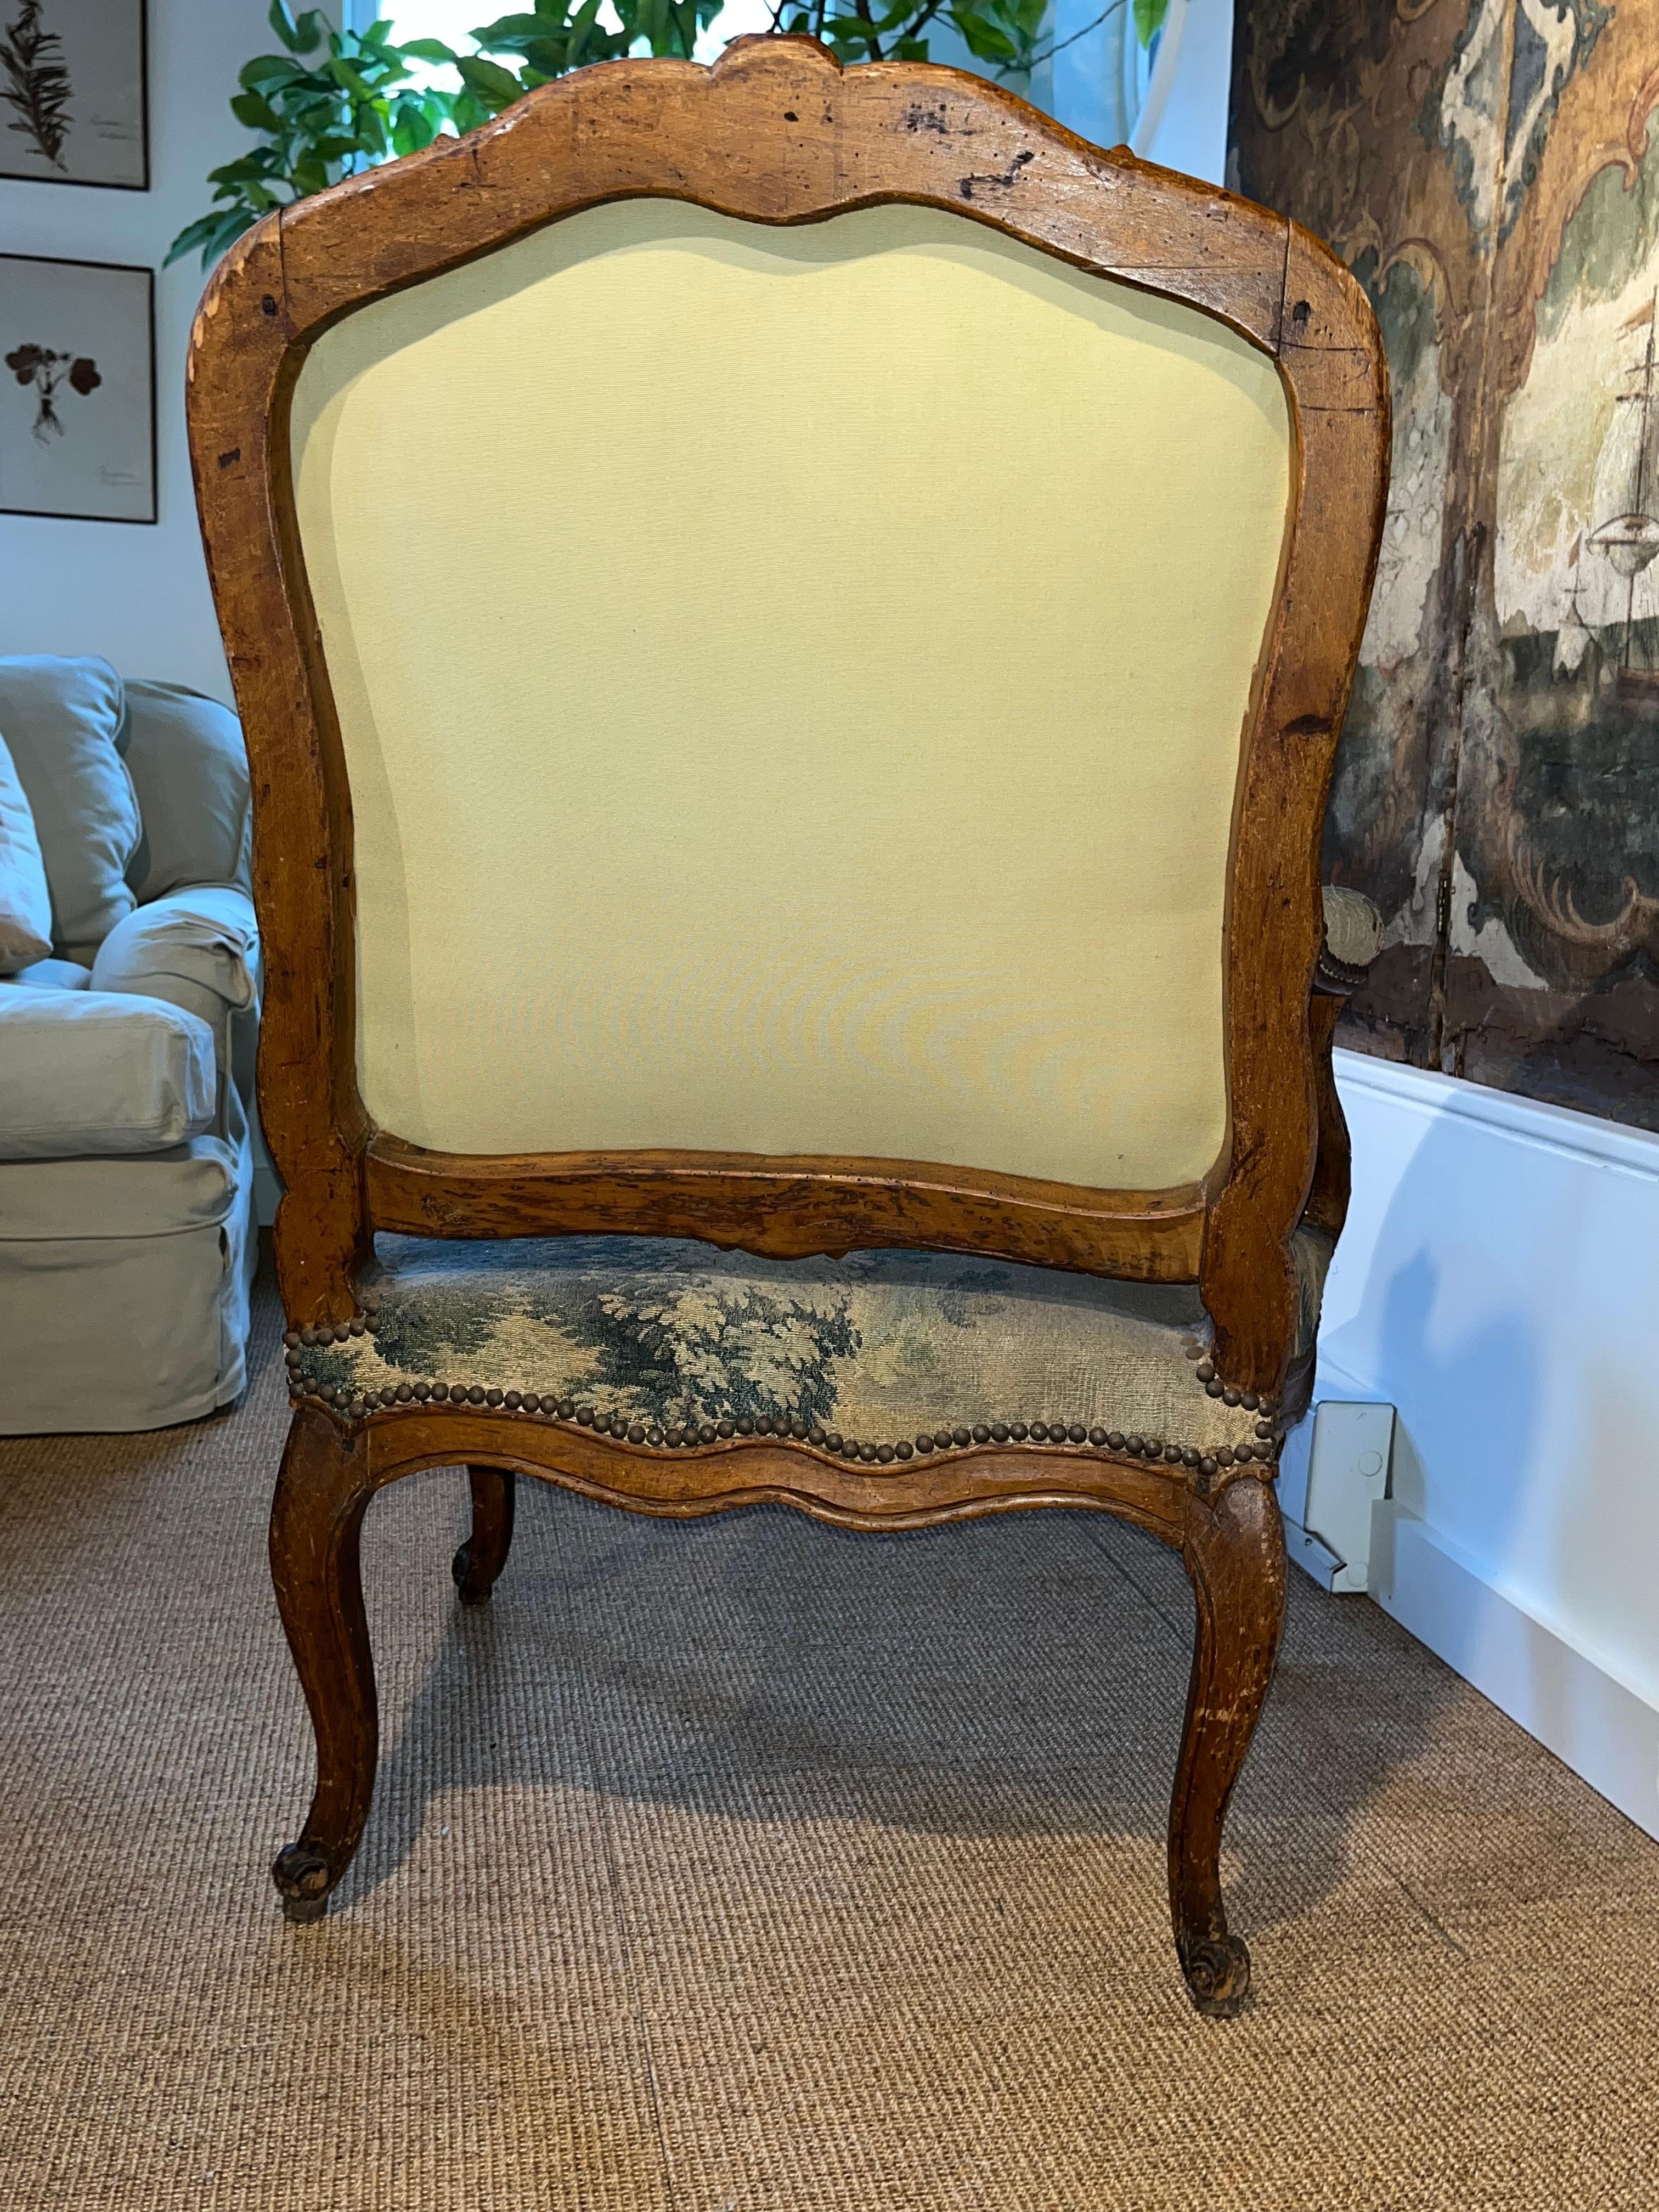 French Louis XV Fauteuil a La Reine, Signed “G. Lebrun” For Sale 8